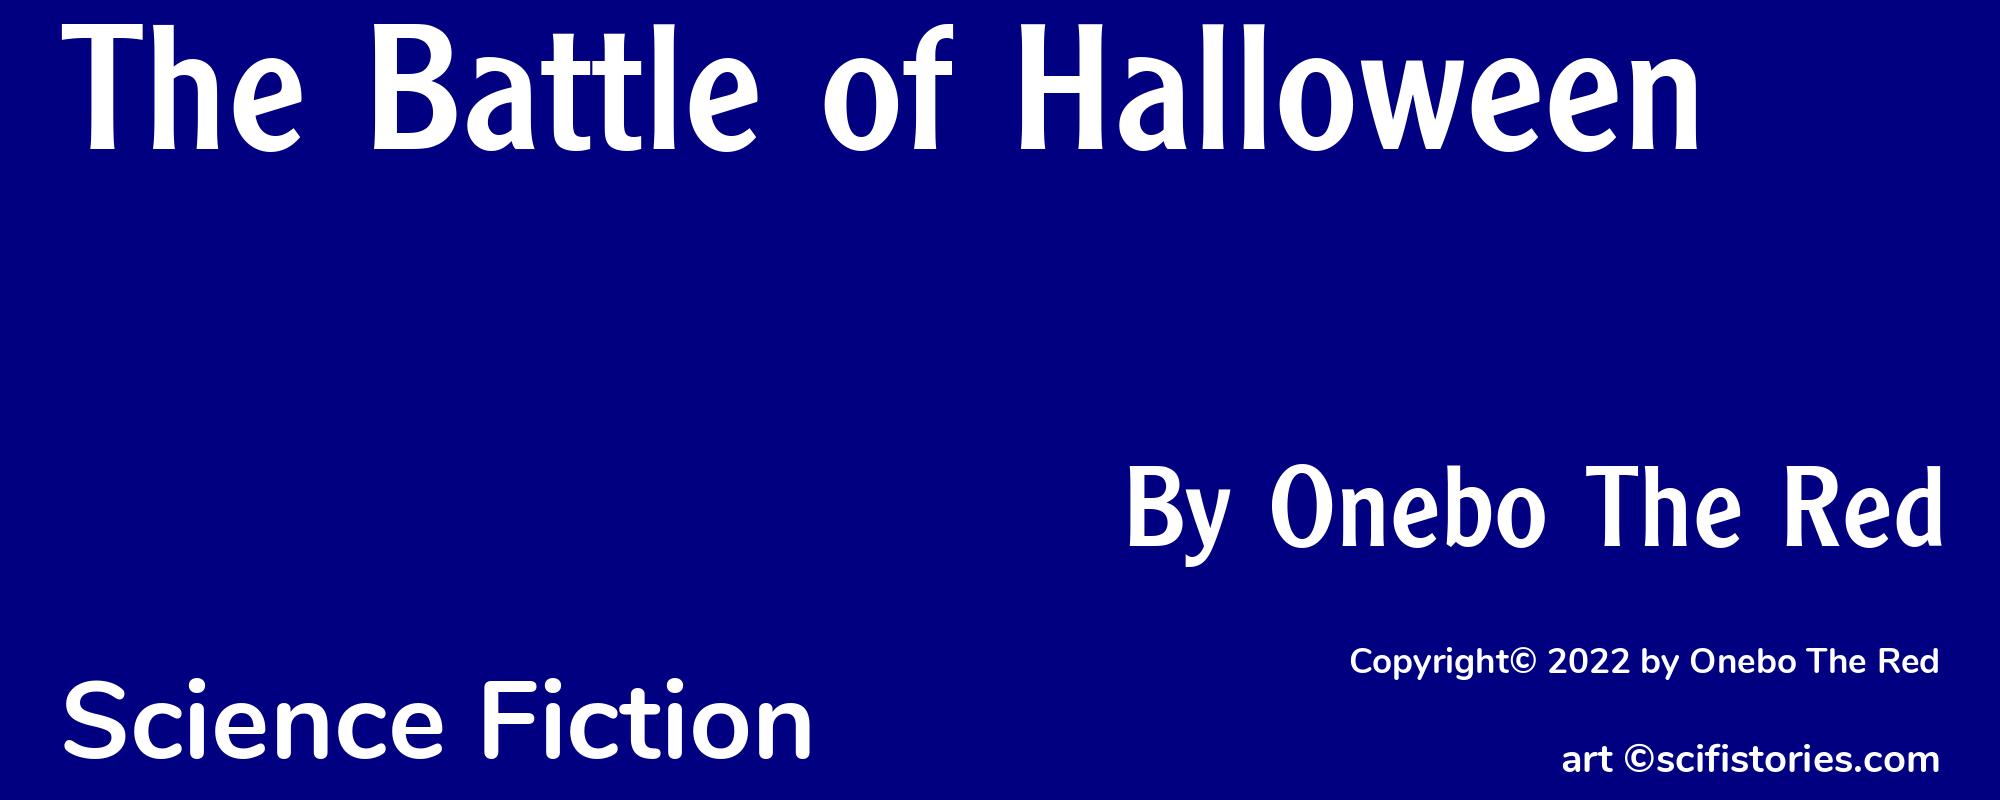 The Battle of Halloween - Cover